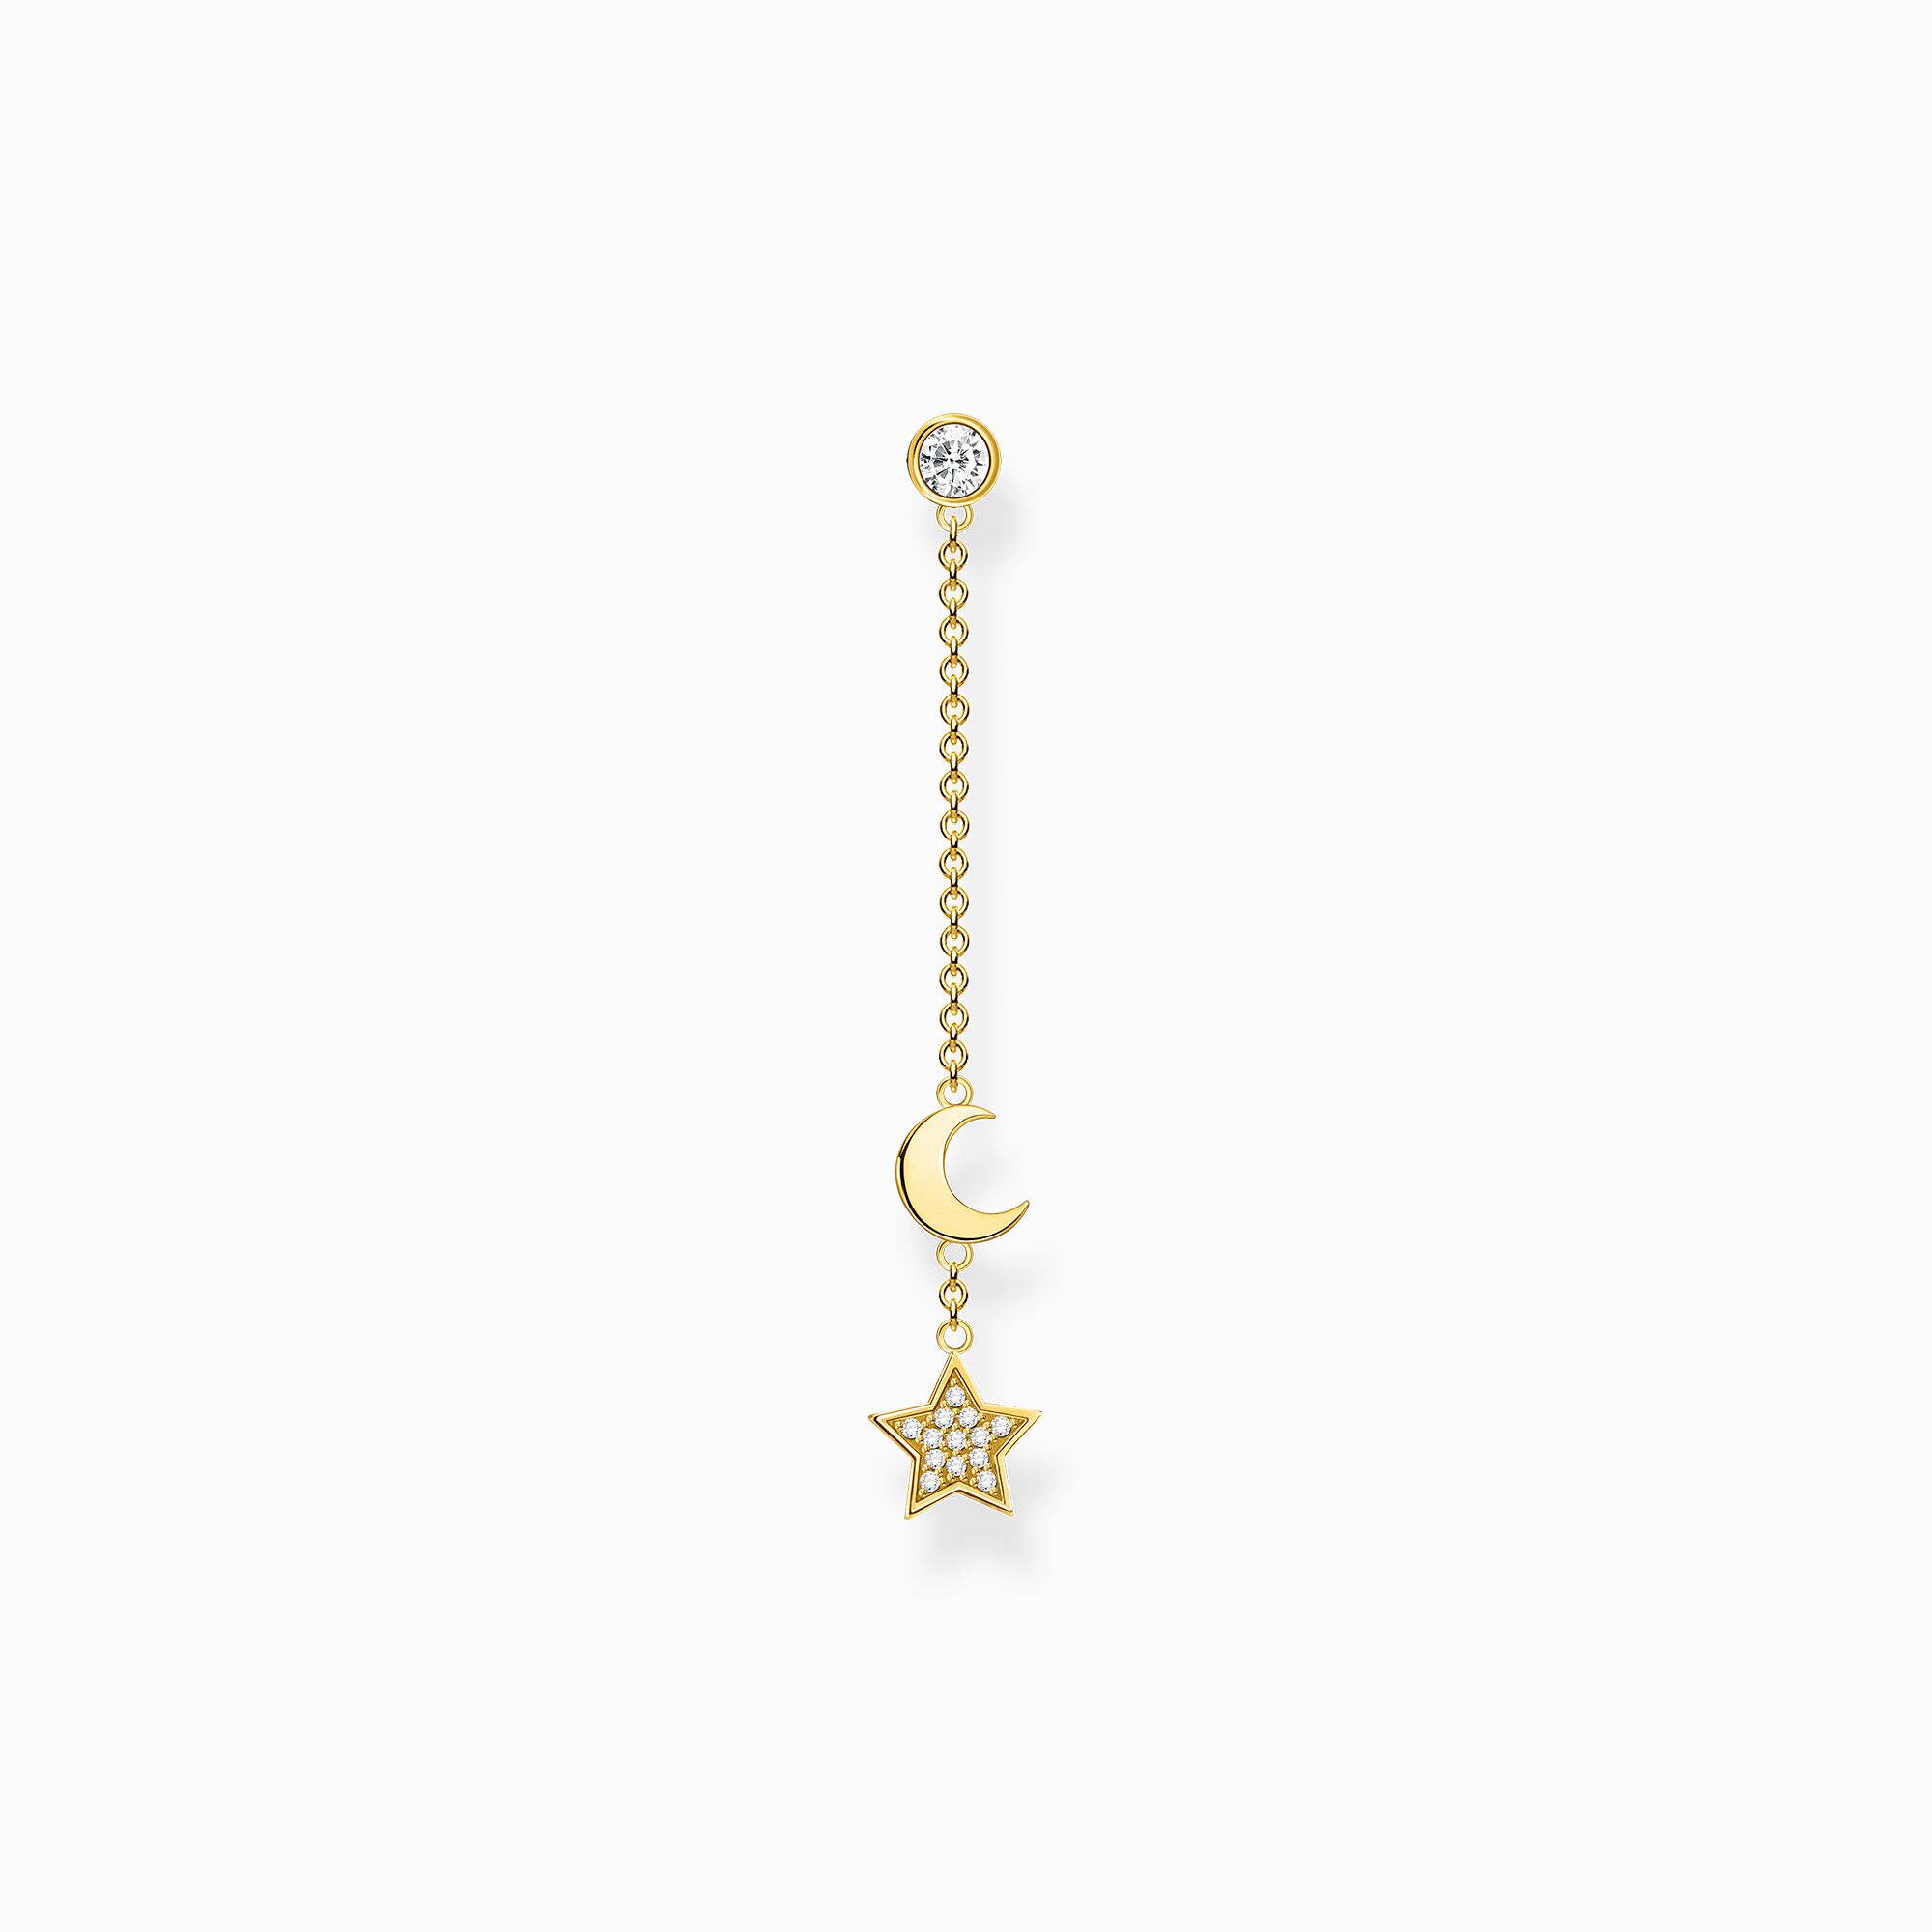 Single earring star and moon gold from the Charming Collection collection in the THOMAS SABO online store